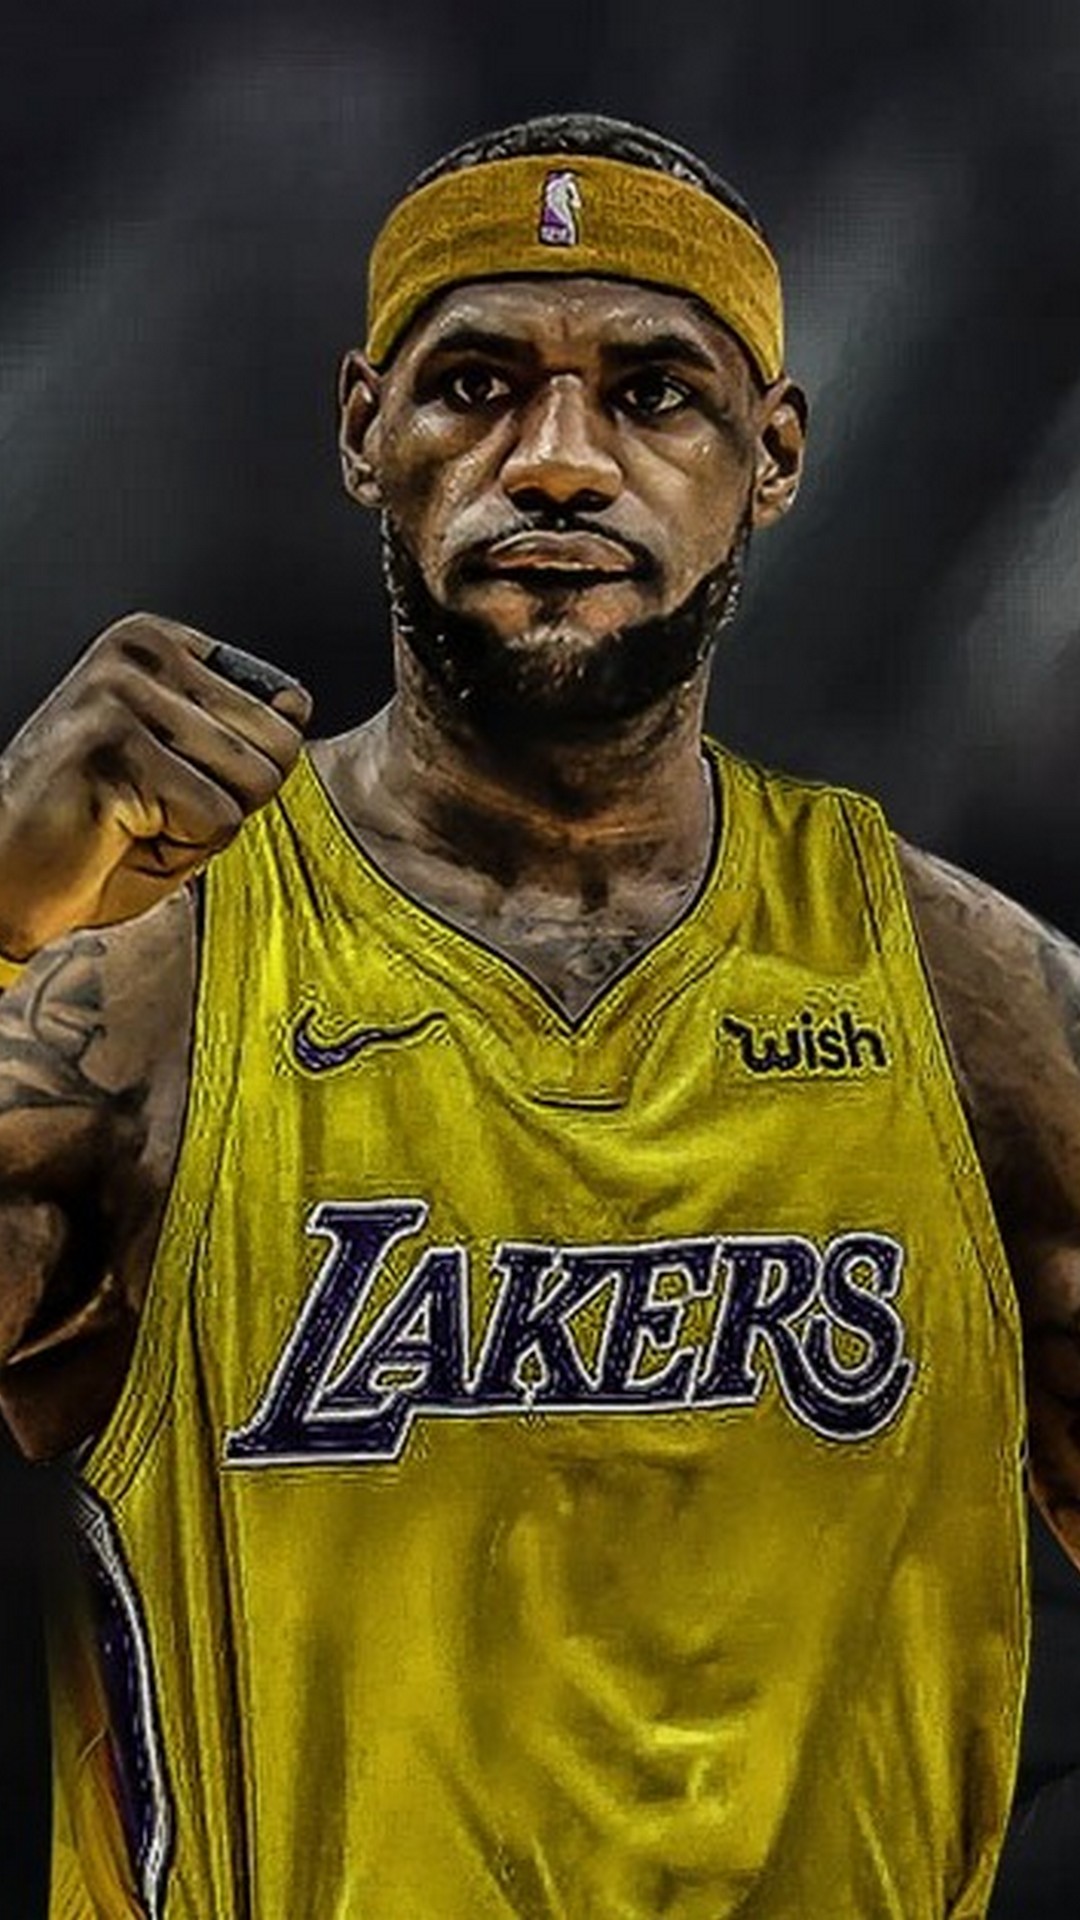 Lebron James Lakers Wallpaper For iPhone with high-resolution 1080x1920 pixel. You can use this wallpaper for your iPhone 5, 6, 7, 8, X backgrounds, Mobile Screensaver, or iPad Lock Screen